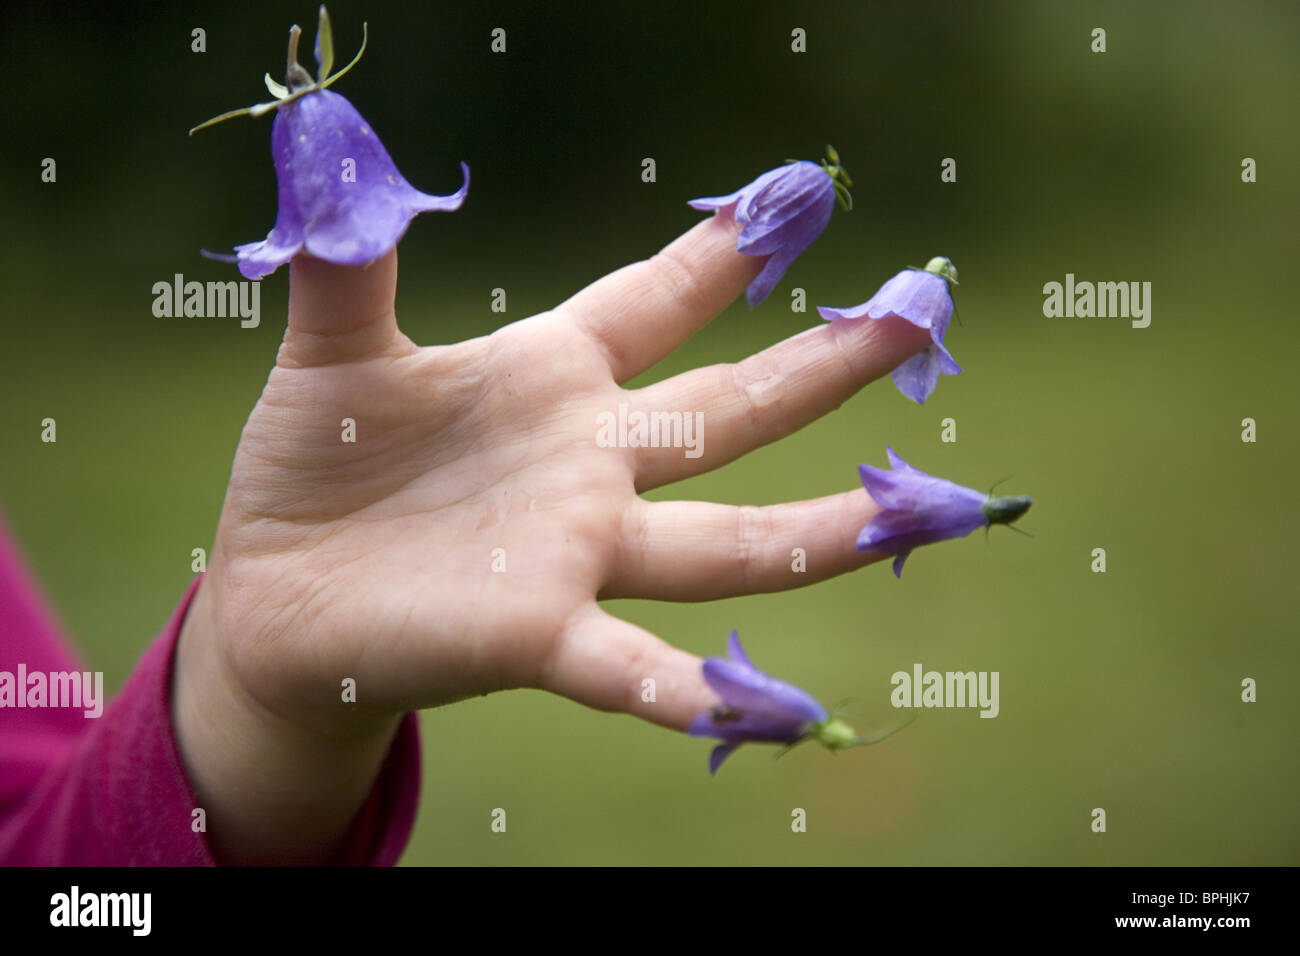 Hand of young girl with blue flower bells of Campanula on all her fingers, Arjang, Dalsland, Sweden Stock Photo